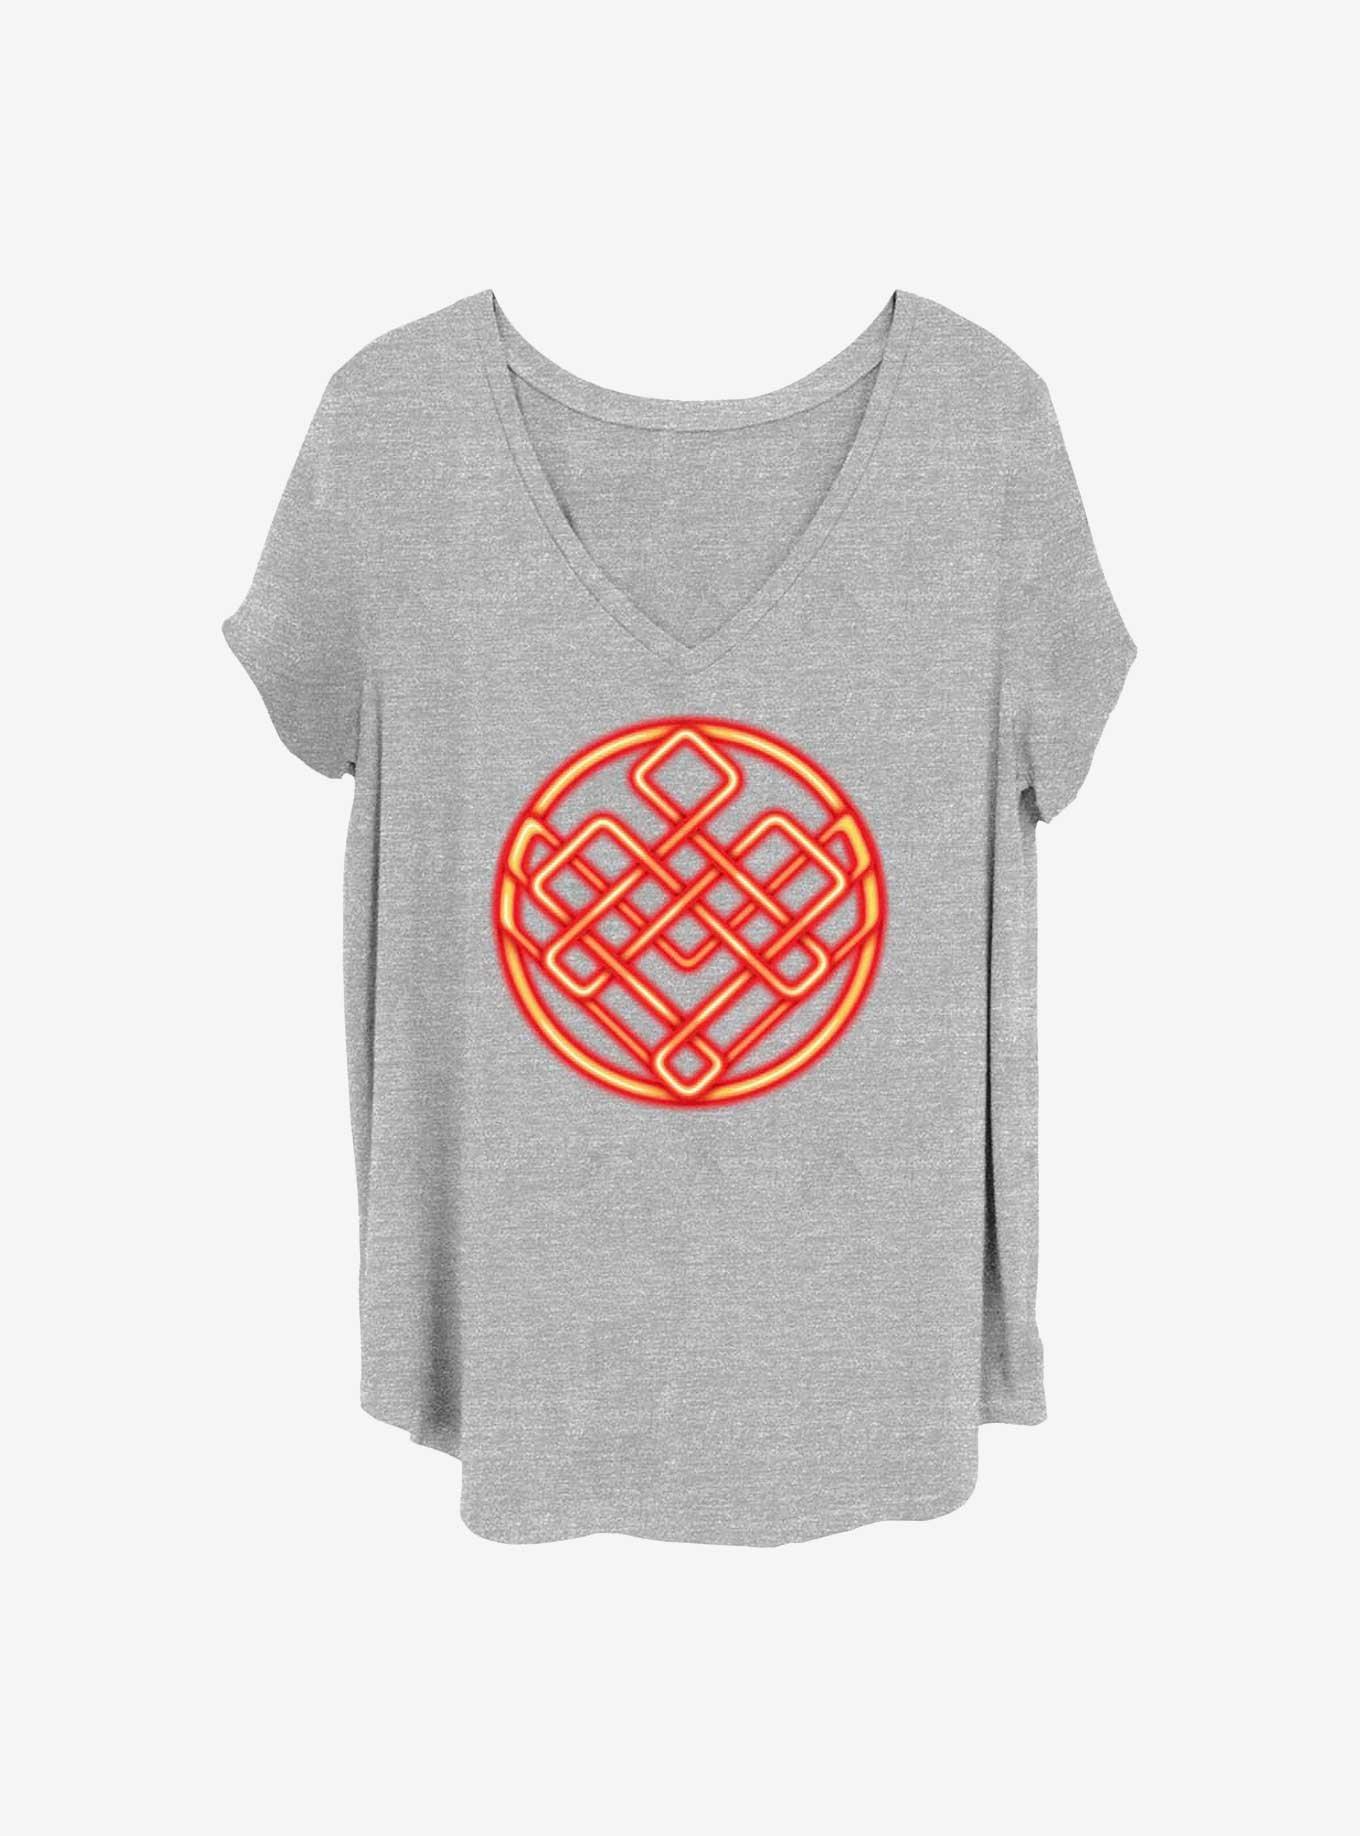 Marvel Shang-Chi and the Legend of the Ten Rings Neon Symbol Girls T-Shirt Plus Size, HEATHER GR, hi-res